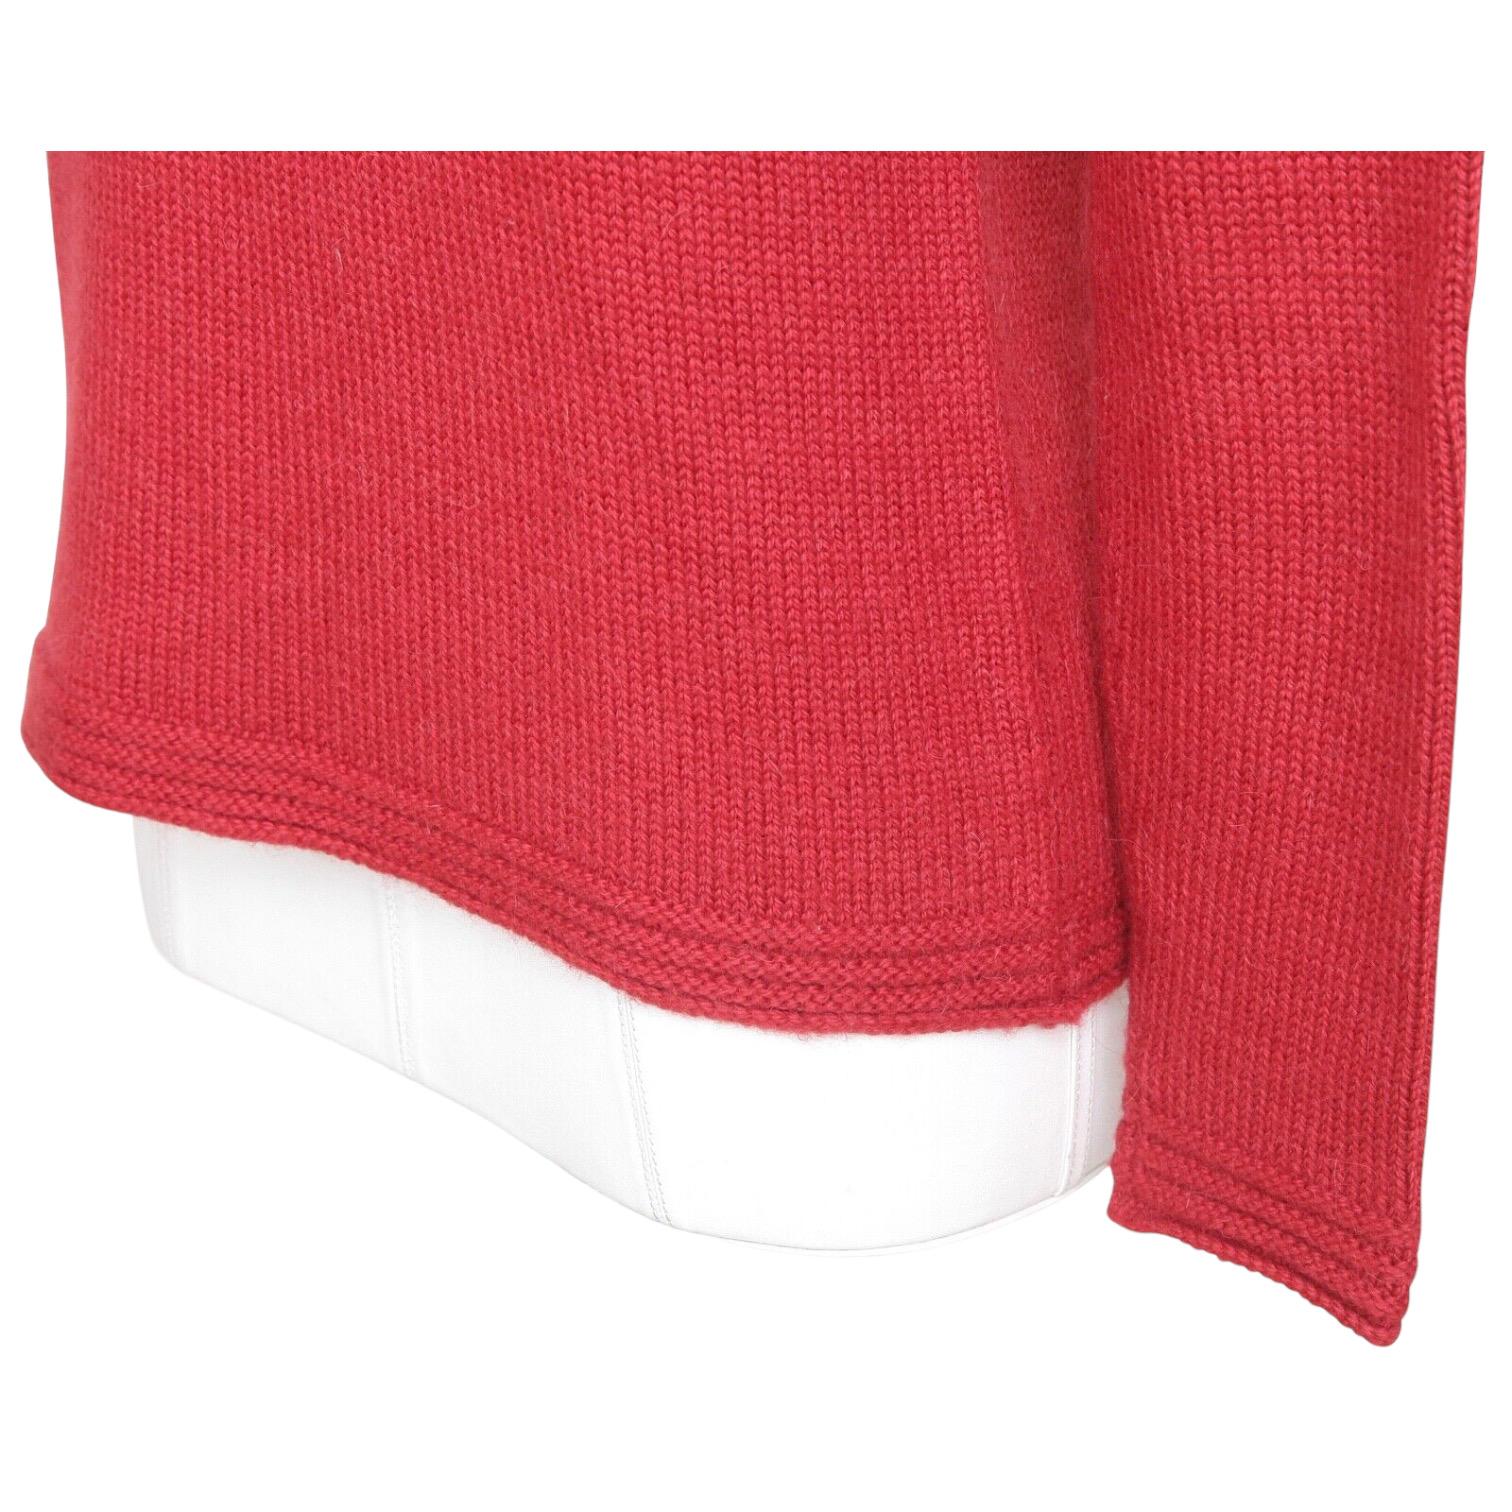 CHLOE Sweater Knit Top Shirt Long Sleeve Red Alpaca Scoop Neck Sz XS For Sale 2